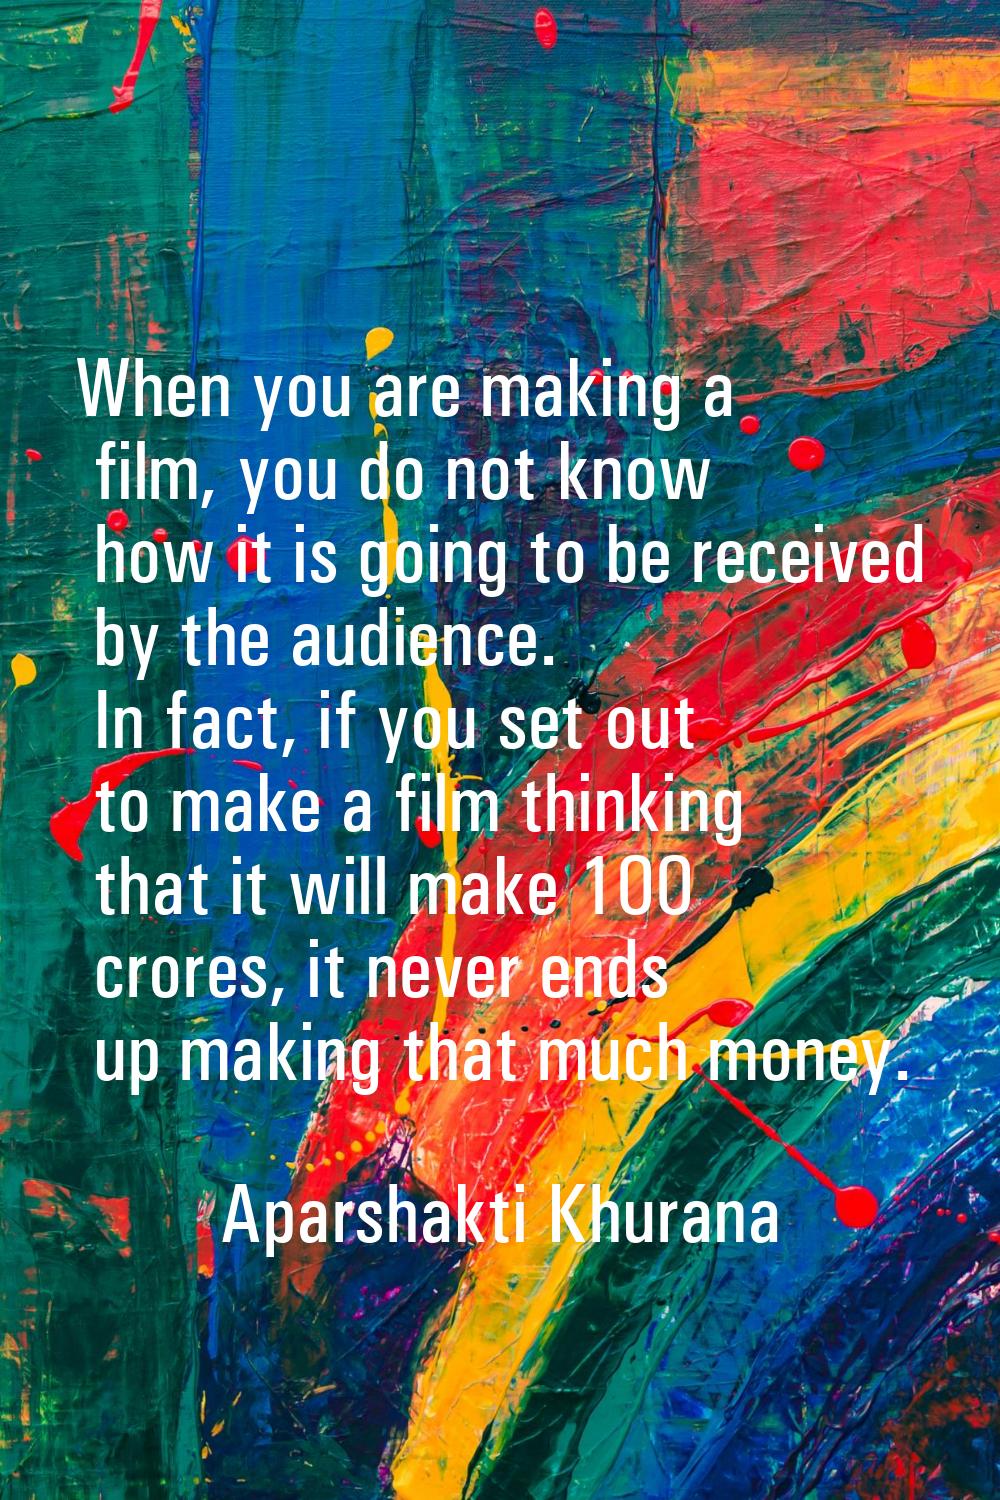 When you are making a film, you do not know how it is going to be received by the audience. In fact